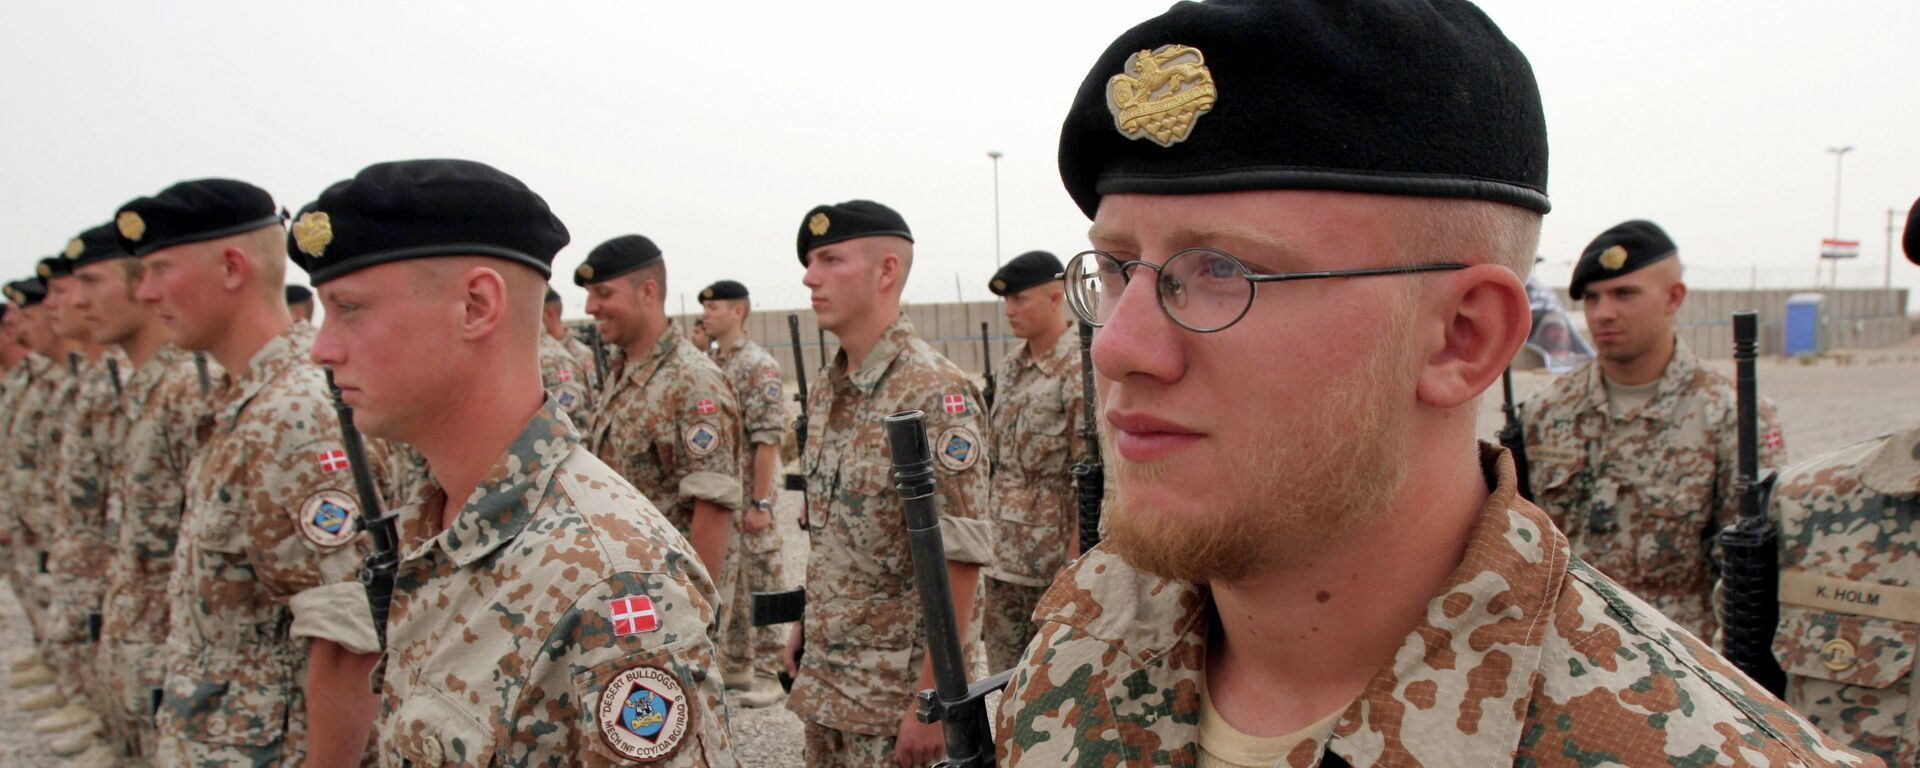 Danish soldiers stand guard during a ceremony to mark transfer of control of a British military base, in Basra, Iraq, Tuesday, April 24, 2007 - Sputnik International, 1920, 02.06.2022